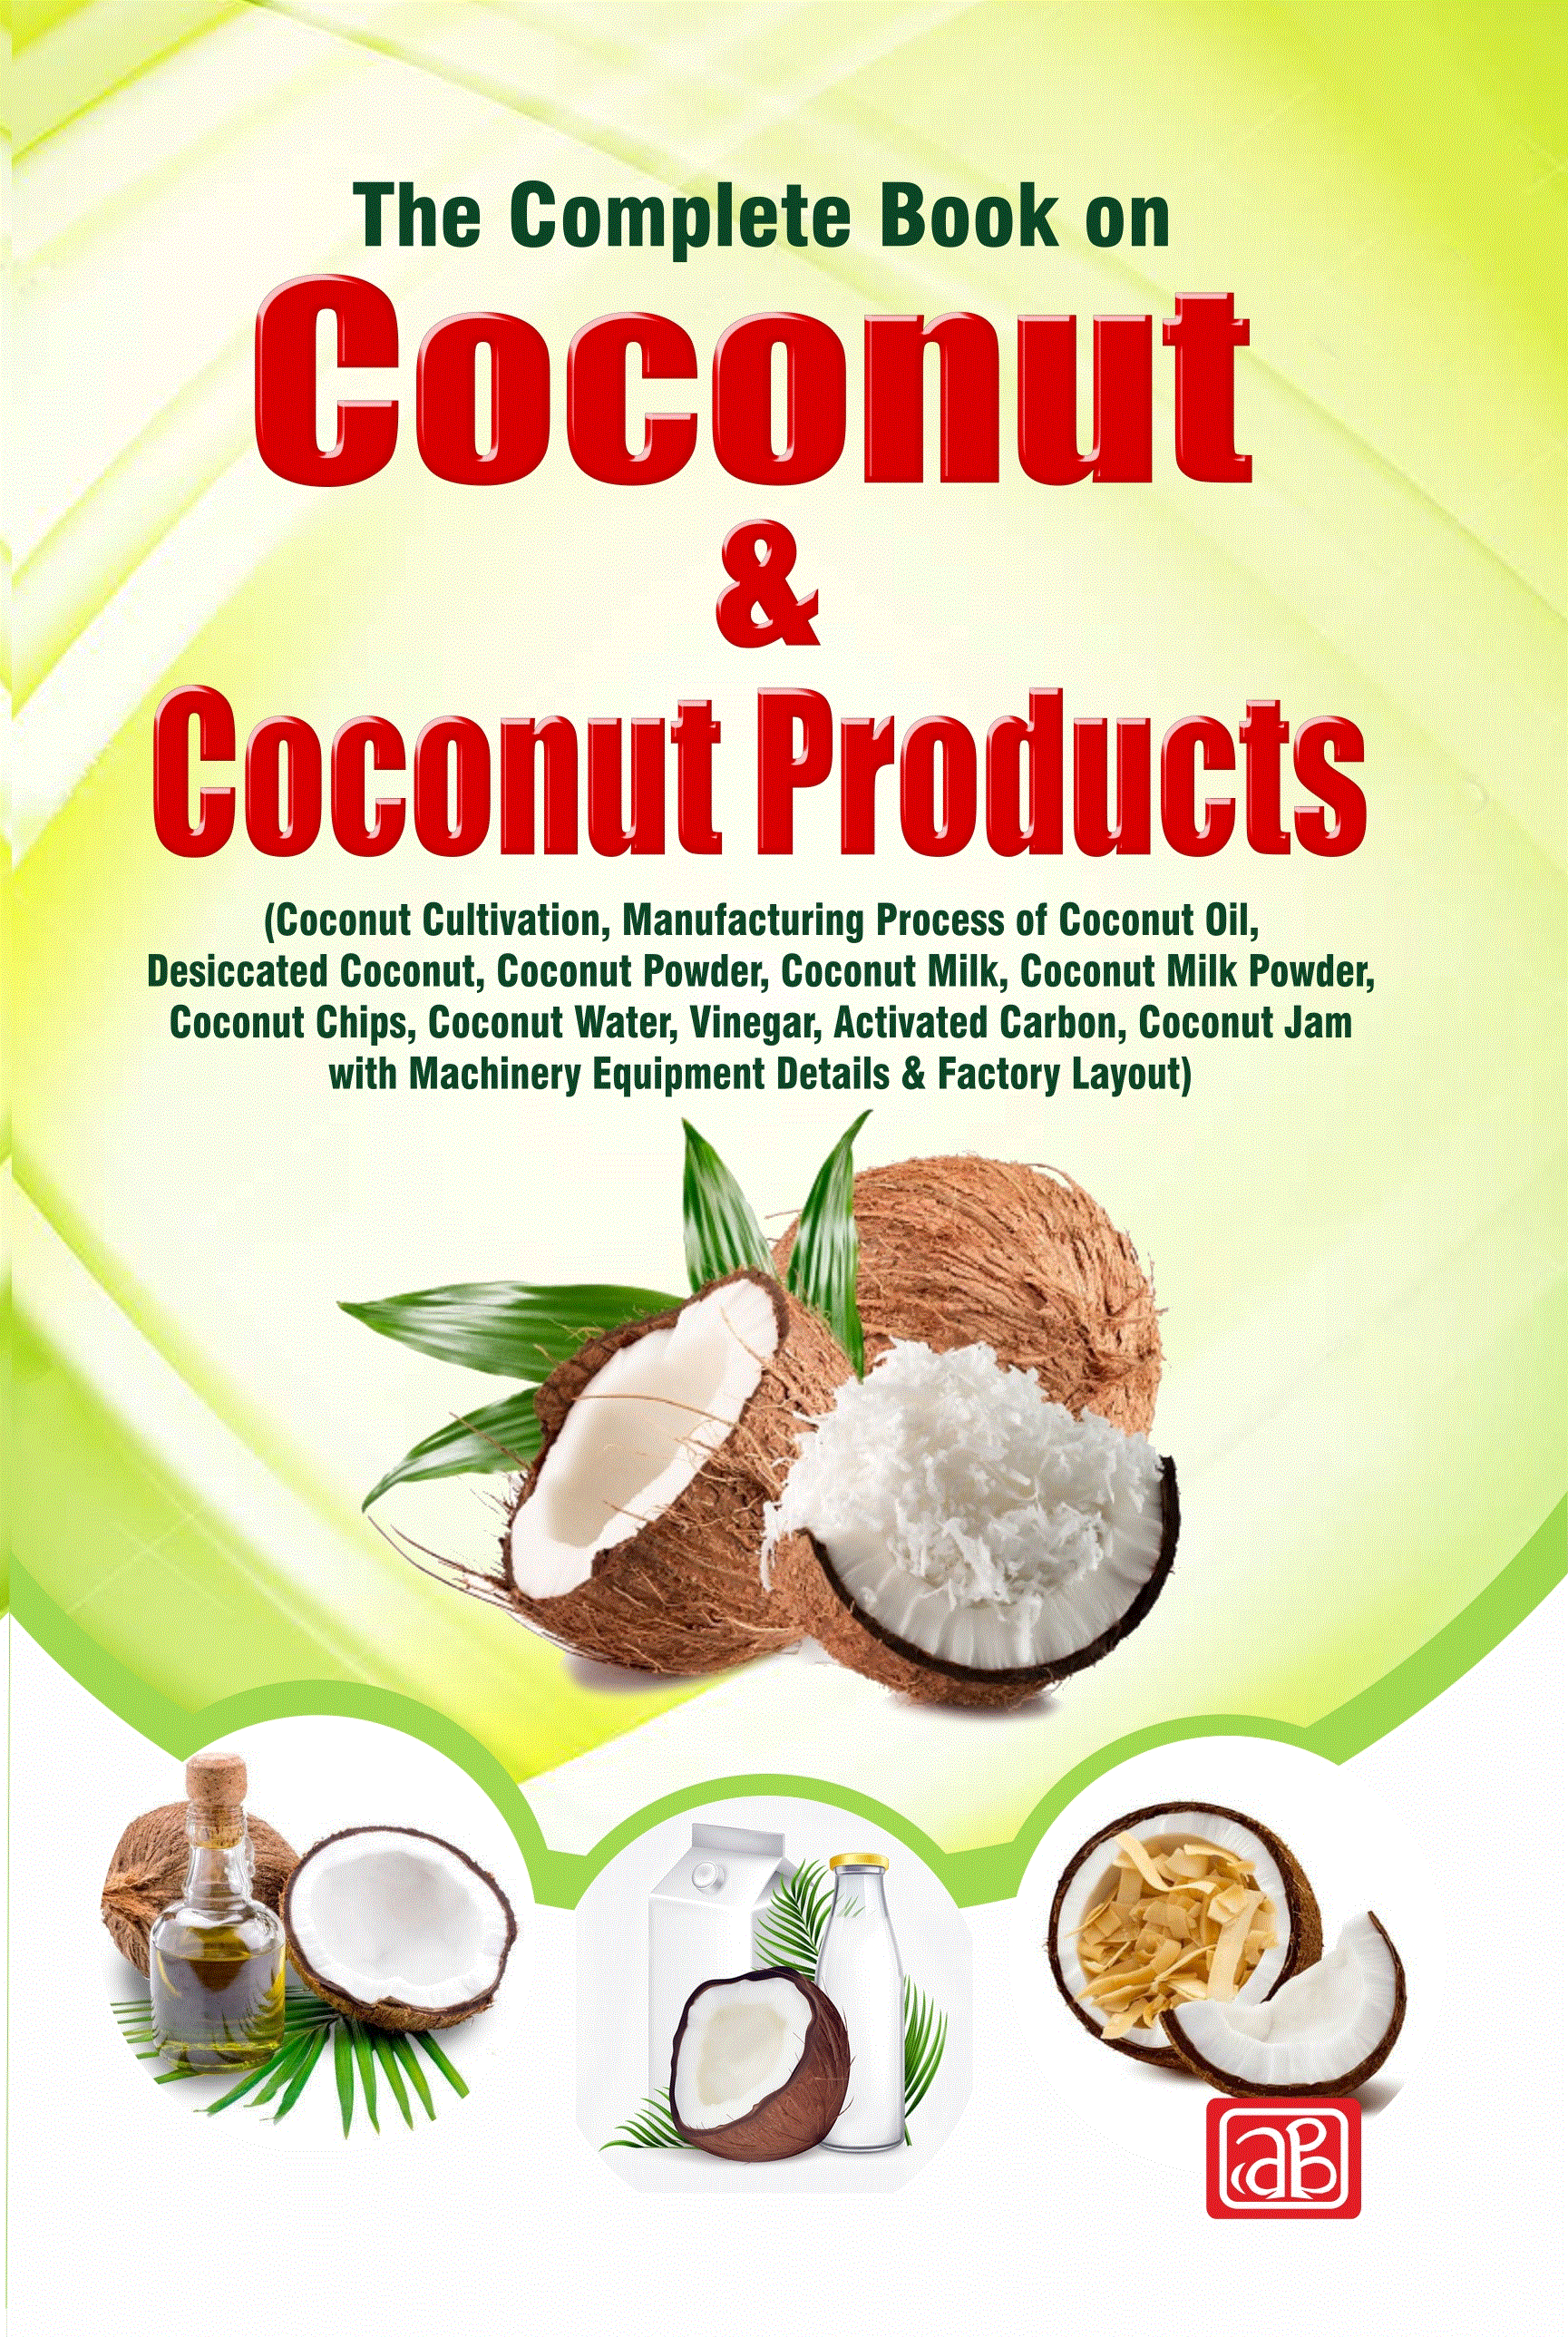 The Complete Book on Coconut & Coconut Products (2nd Edition)